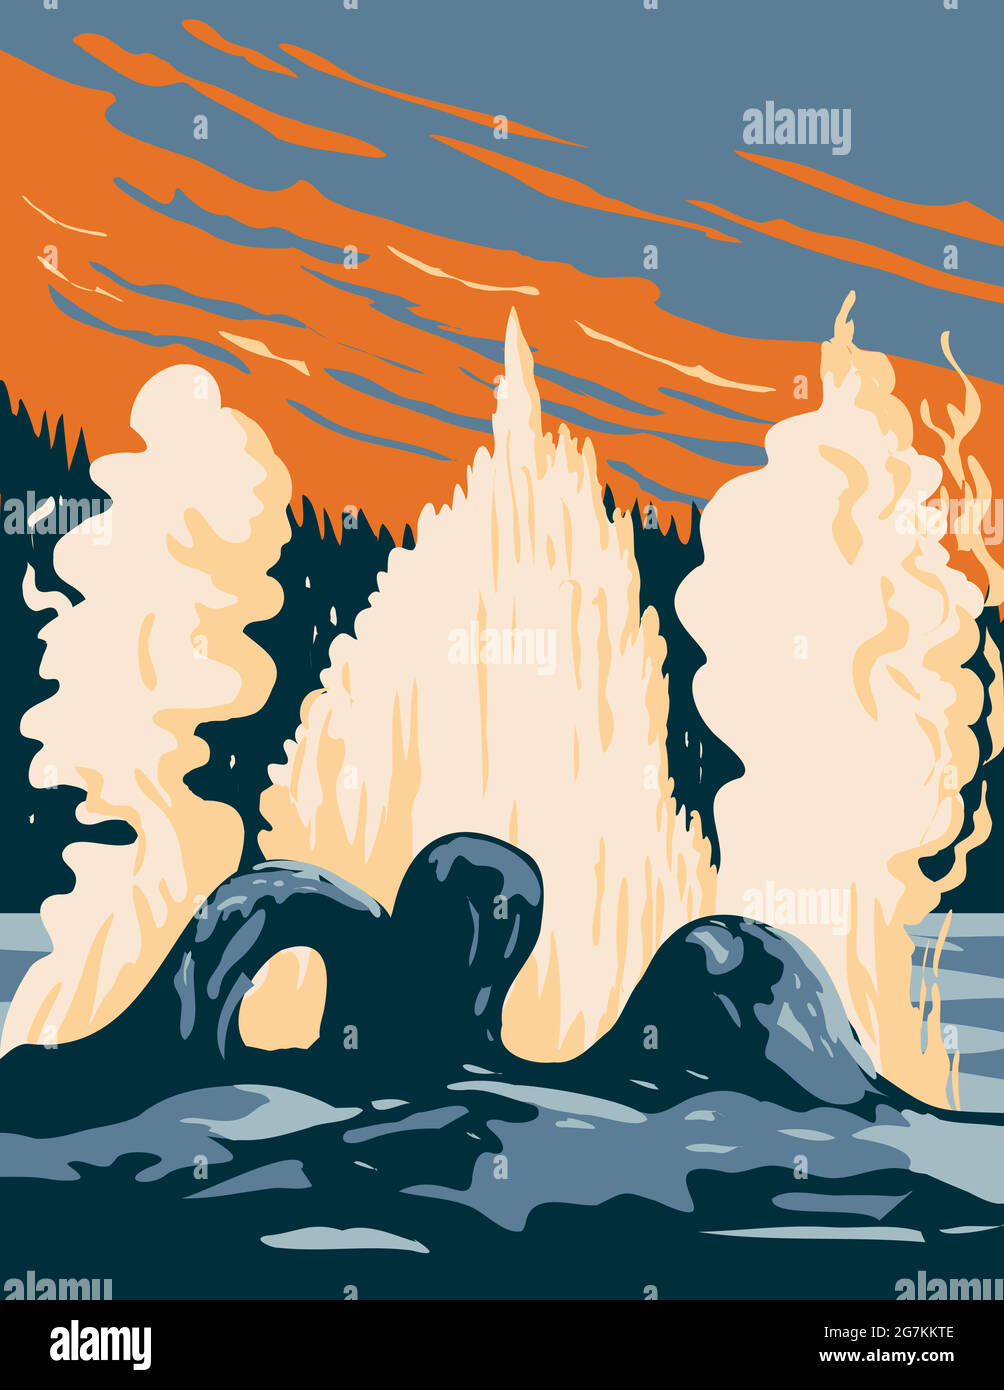 WPA poster art of Grotto Geyser, a fountain-type geyser located in the Upper Geyser Basin in Yellowstone National Park, Teton County, Wyoming USA done Stock Vector